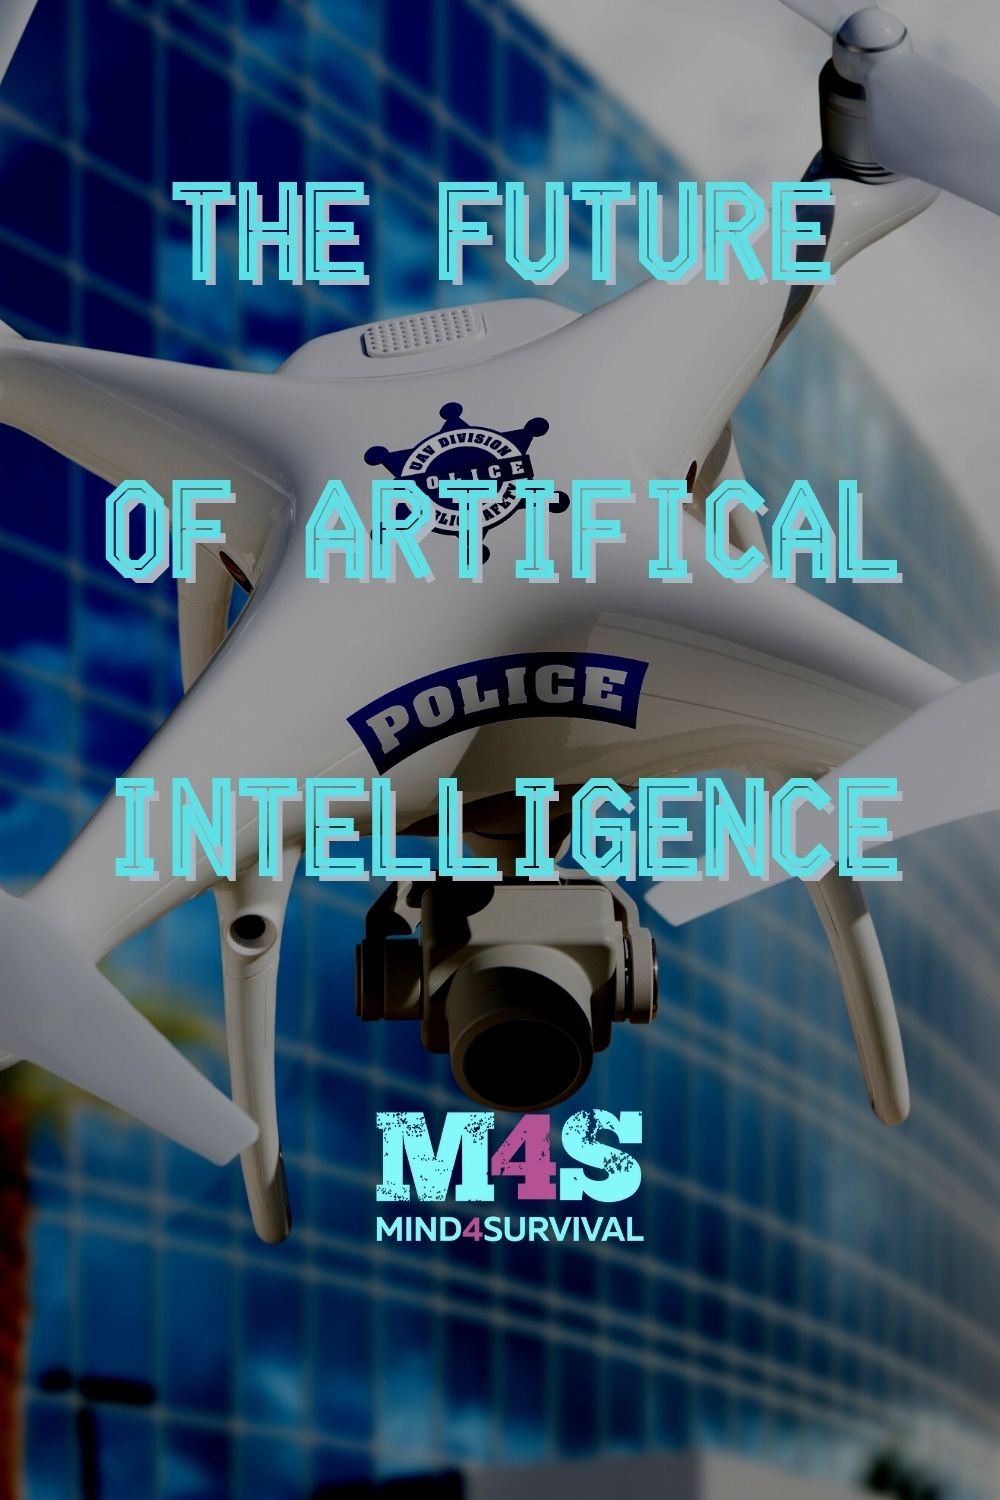 146: The Future of Artificial Intelligence